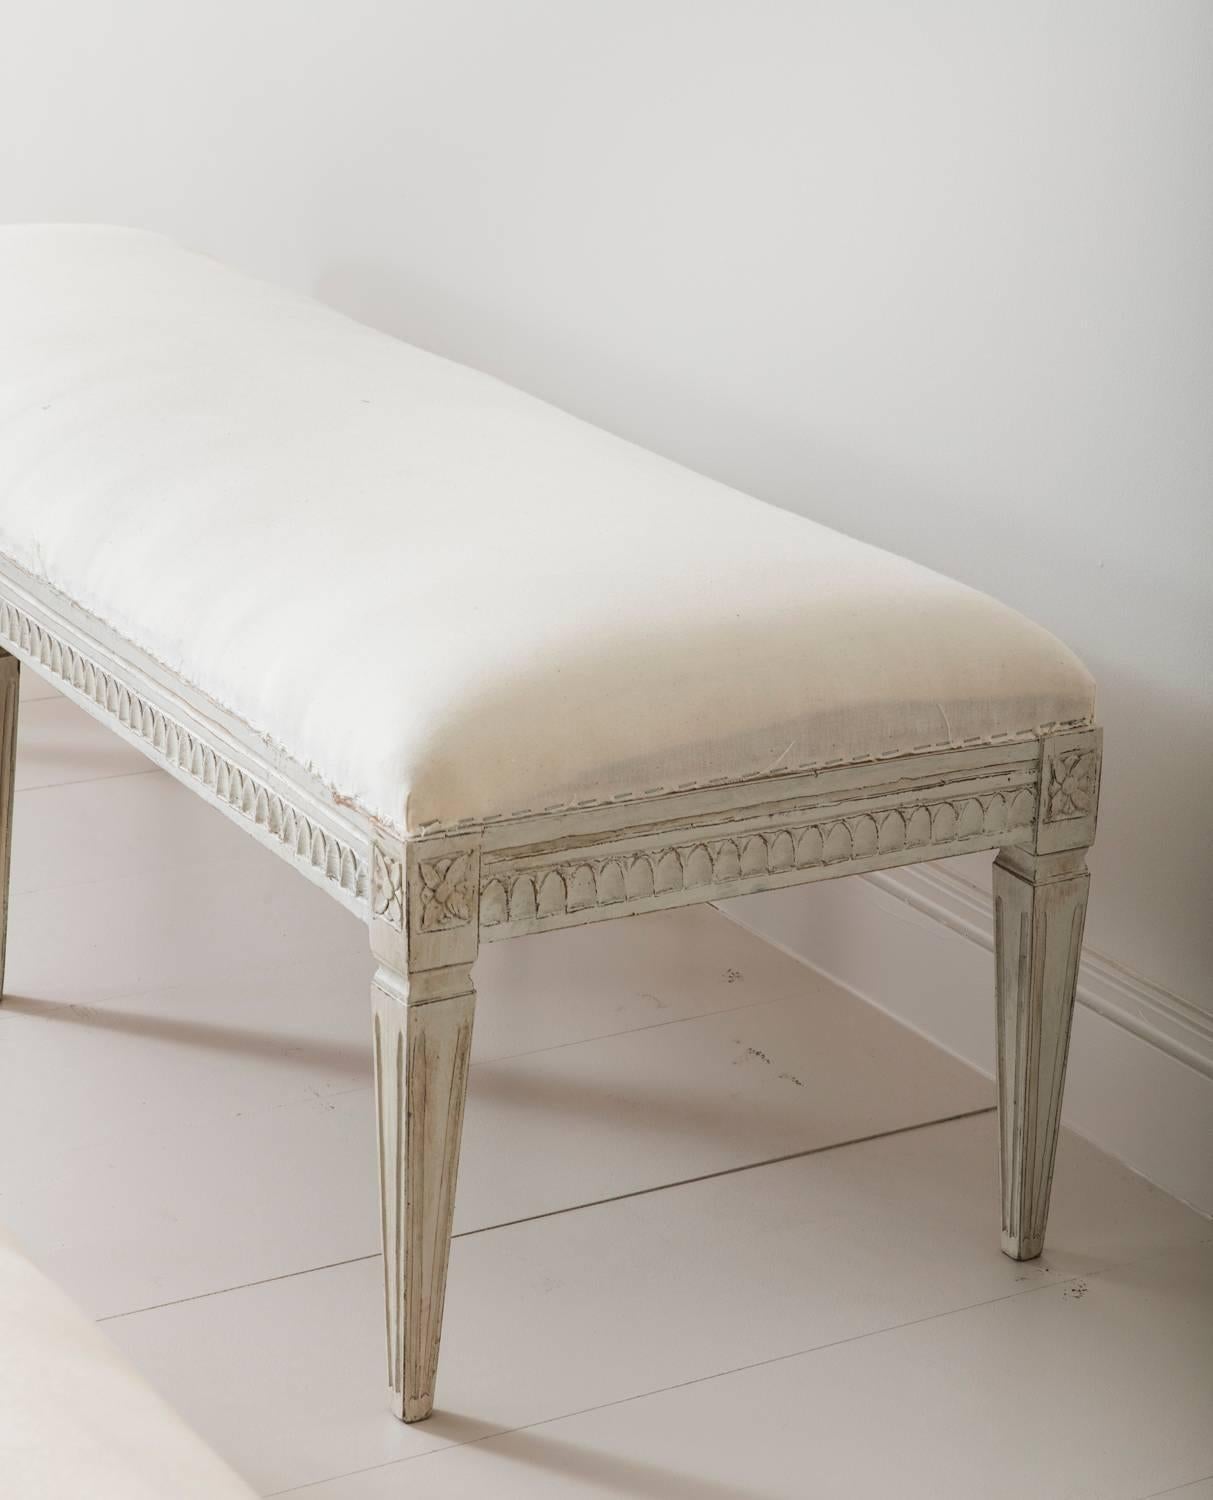 This is a richly carved 19th century Swedish Gustavian period painted long bench. There is carved egg and dart detail on the seat frame and carved rosettes above tapered and fluted legs. Chalky Gustavian gray-white paint finish.

The Gustavian